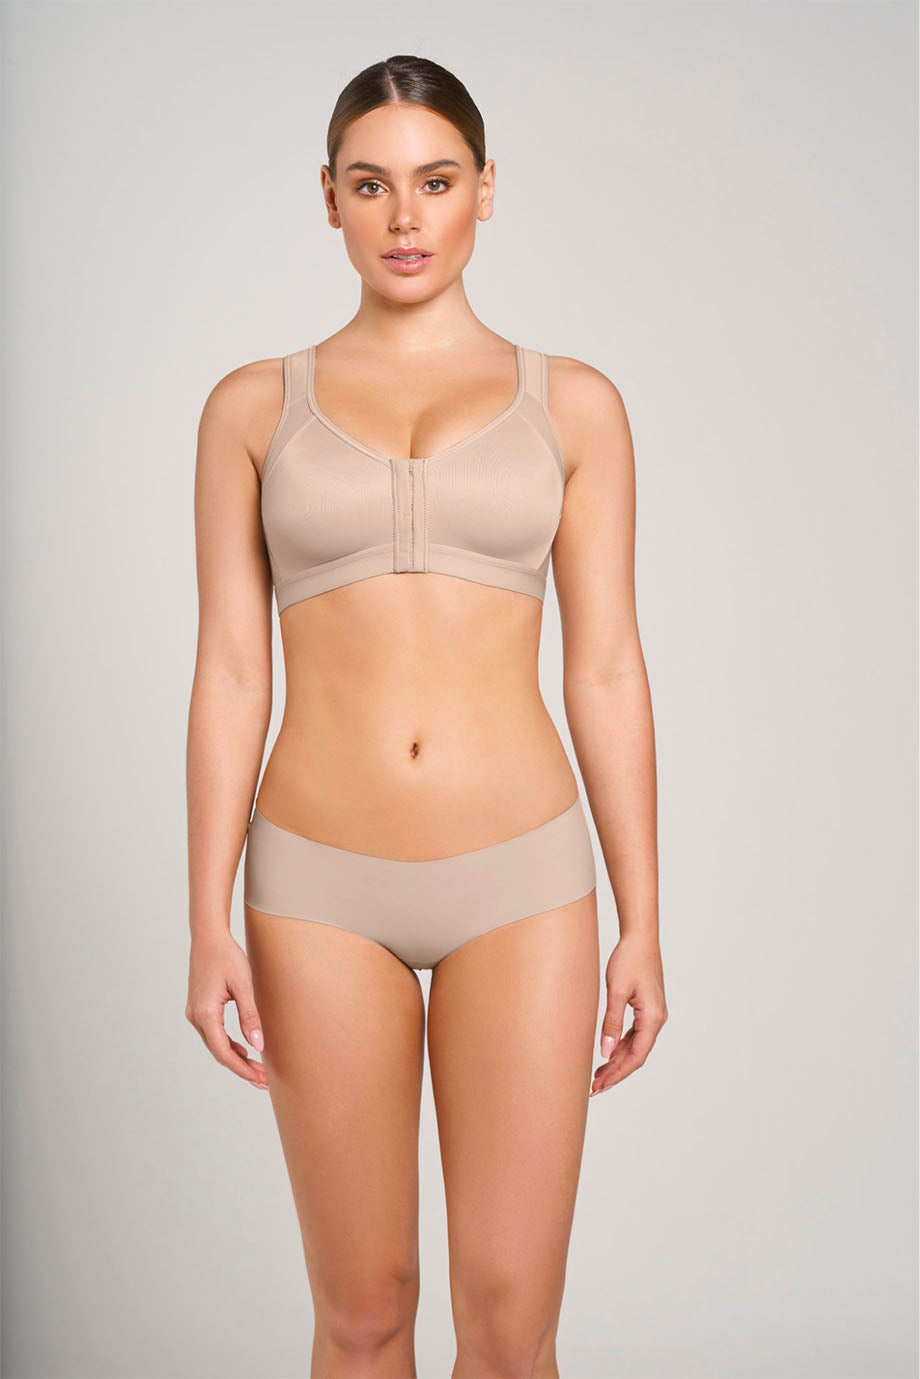 Post Surgery Bra for Women Surgical Bras Front Closure Sports Bras